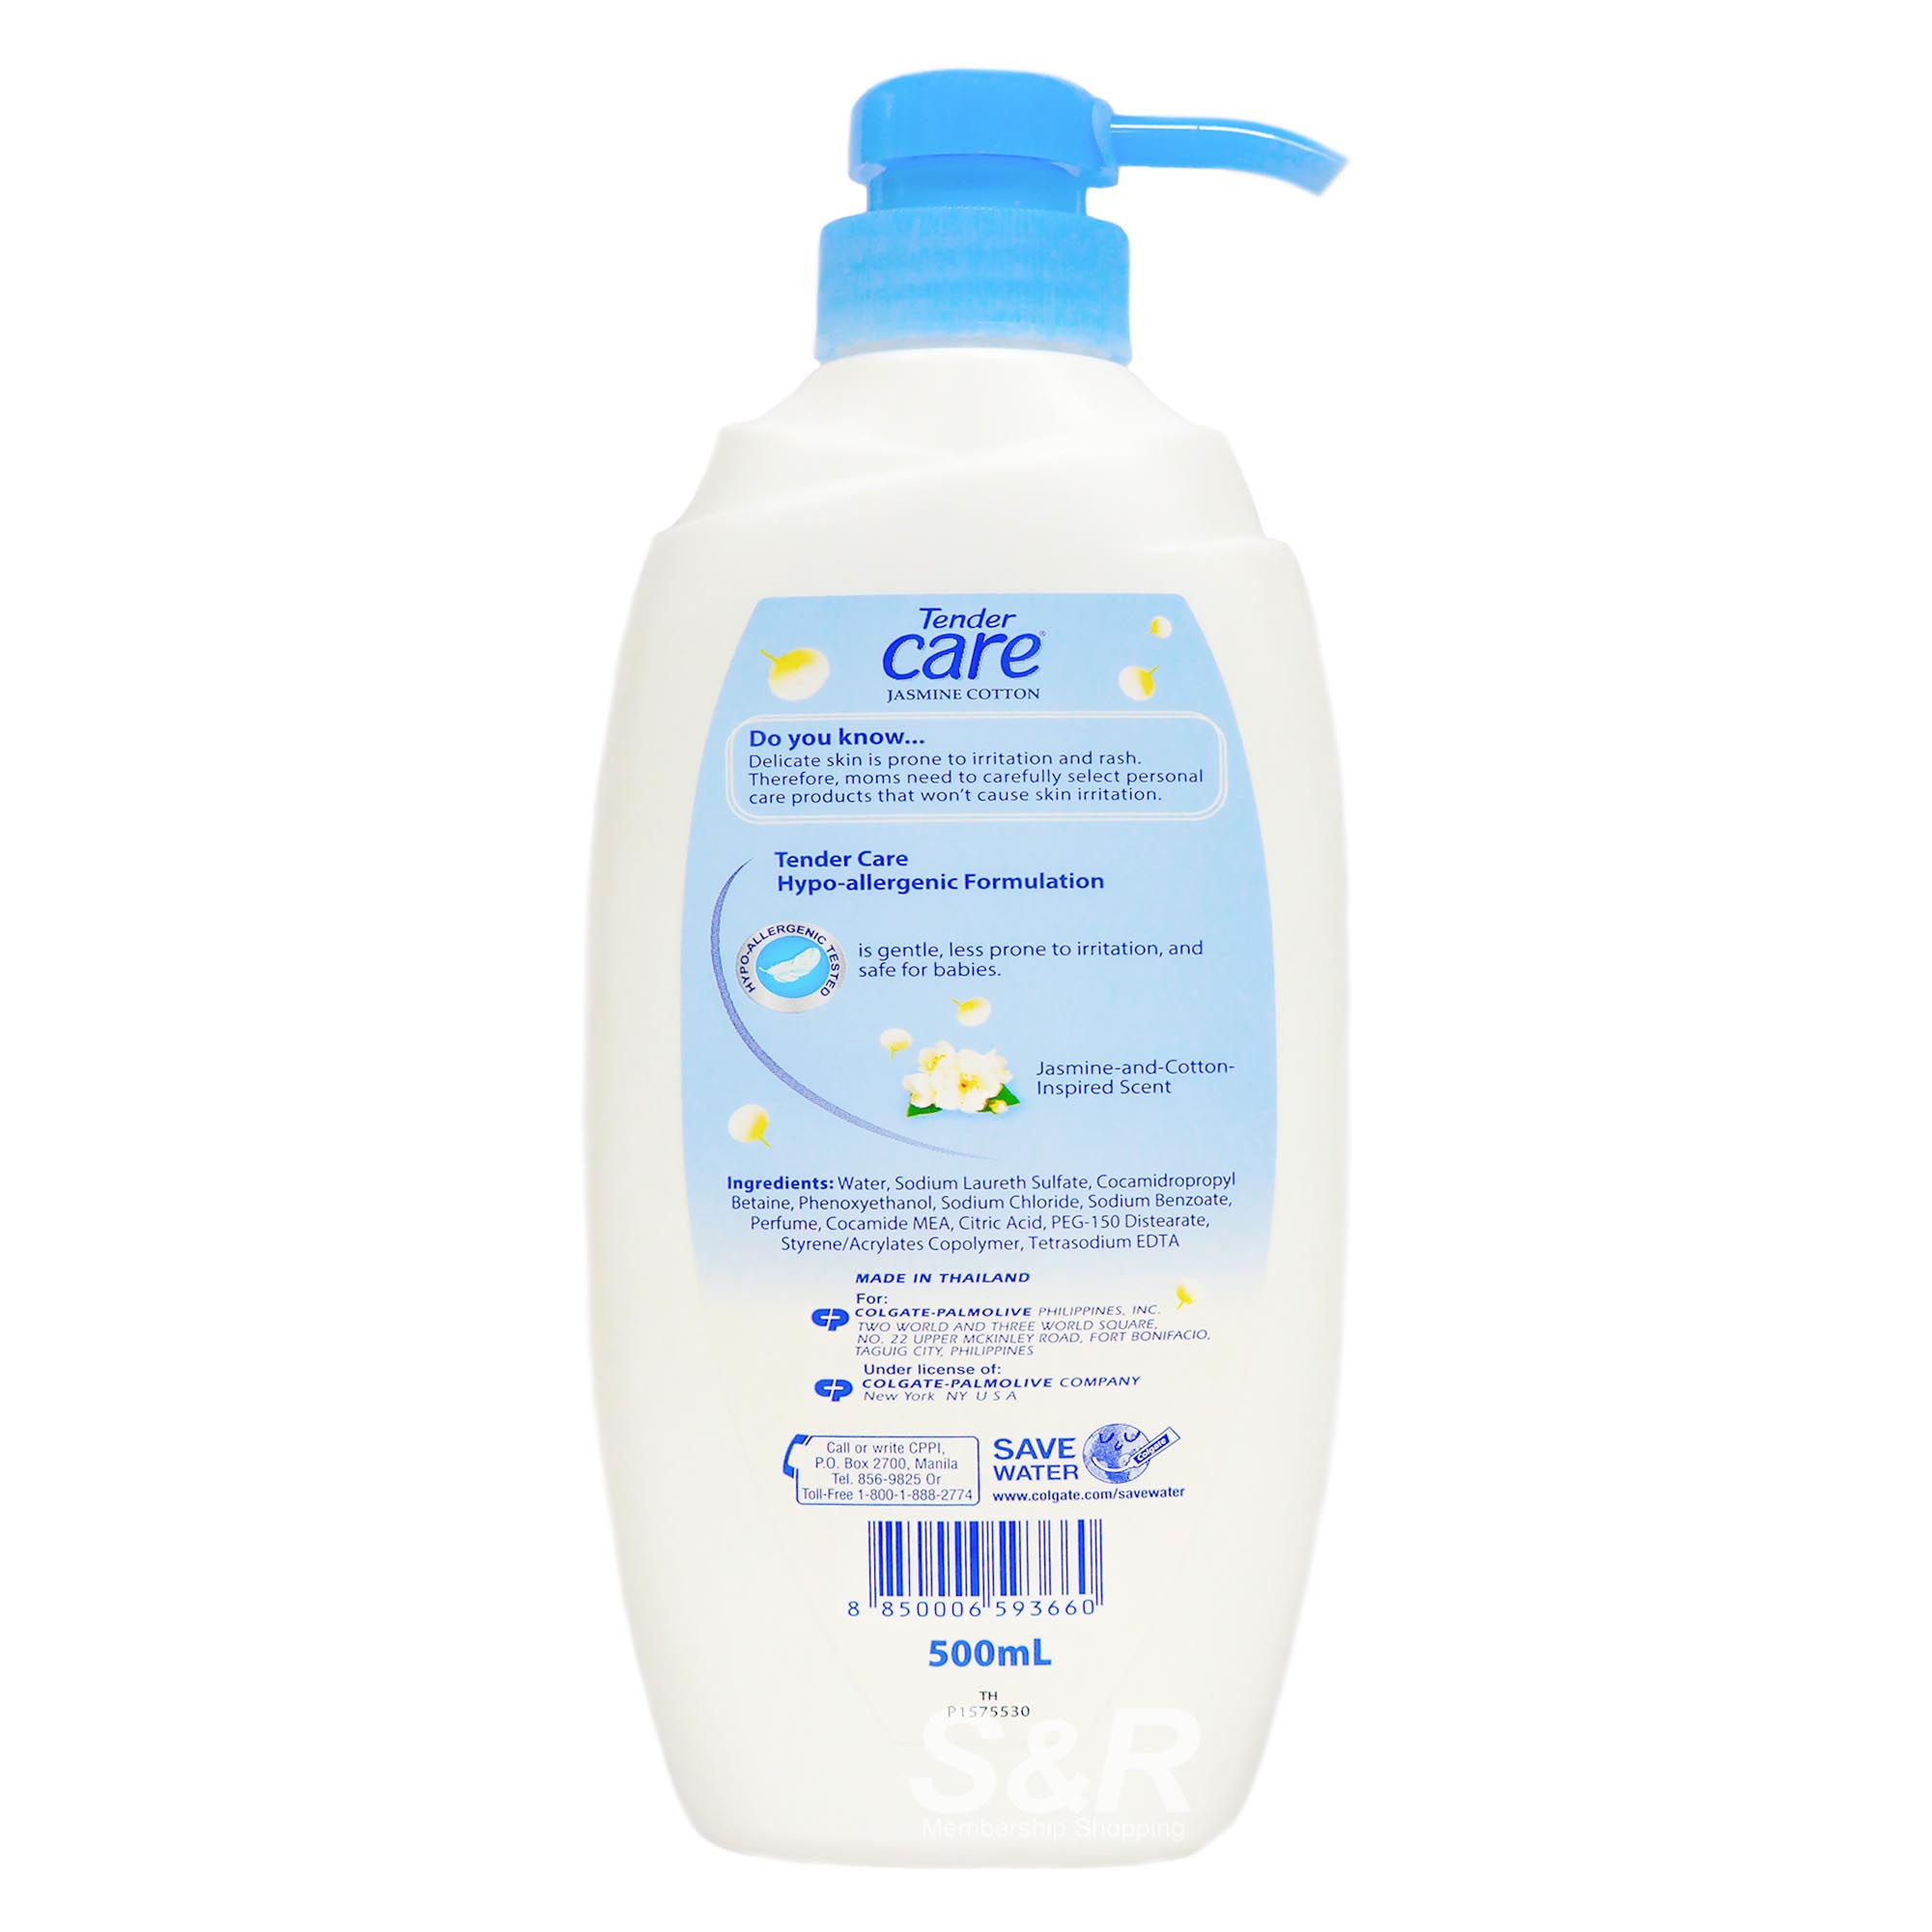 Tender Care - Give your little one hypo-allergenic care